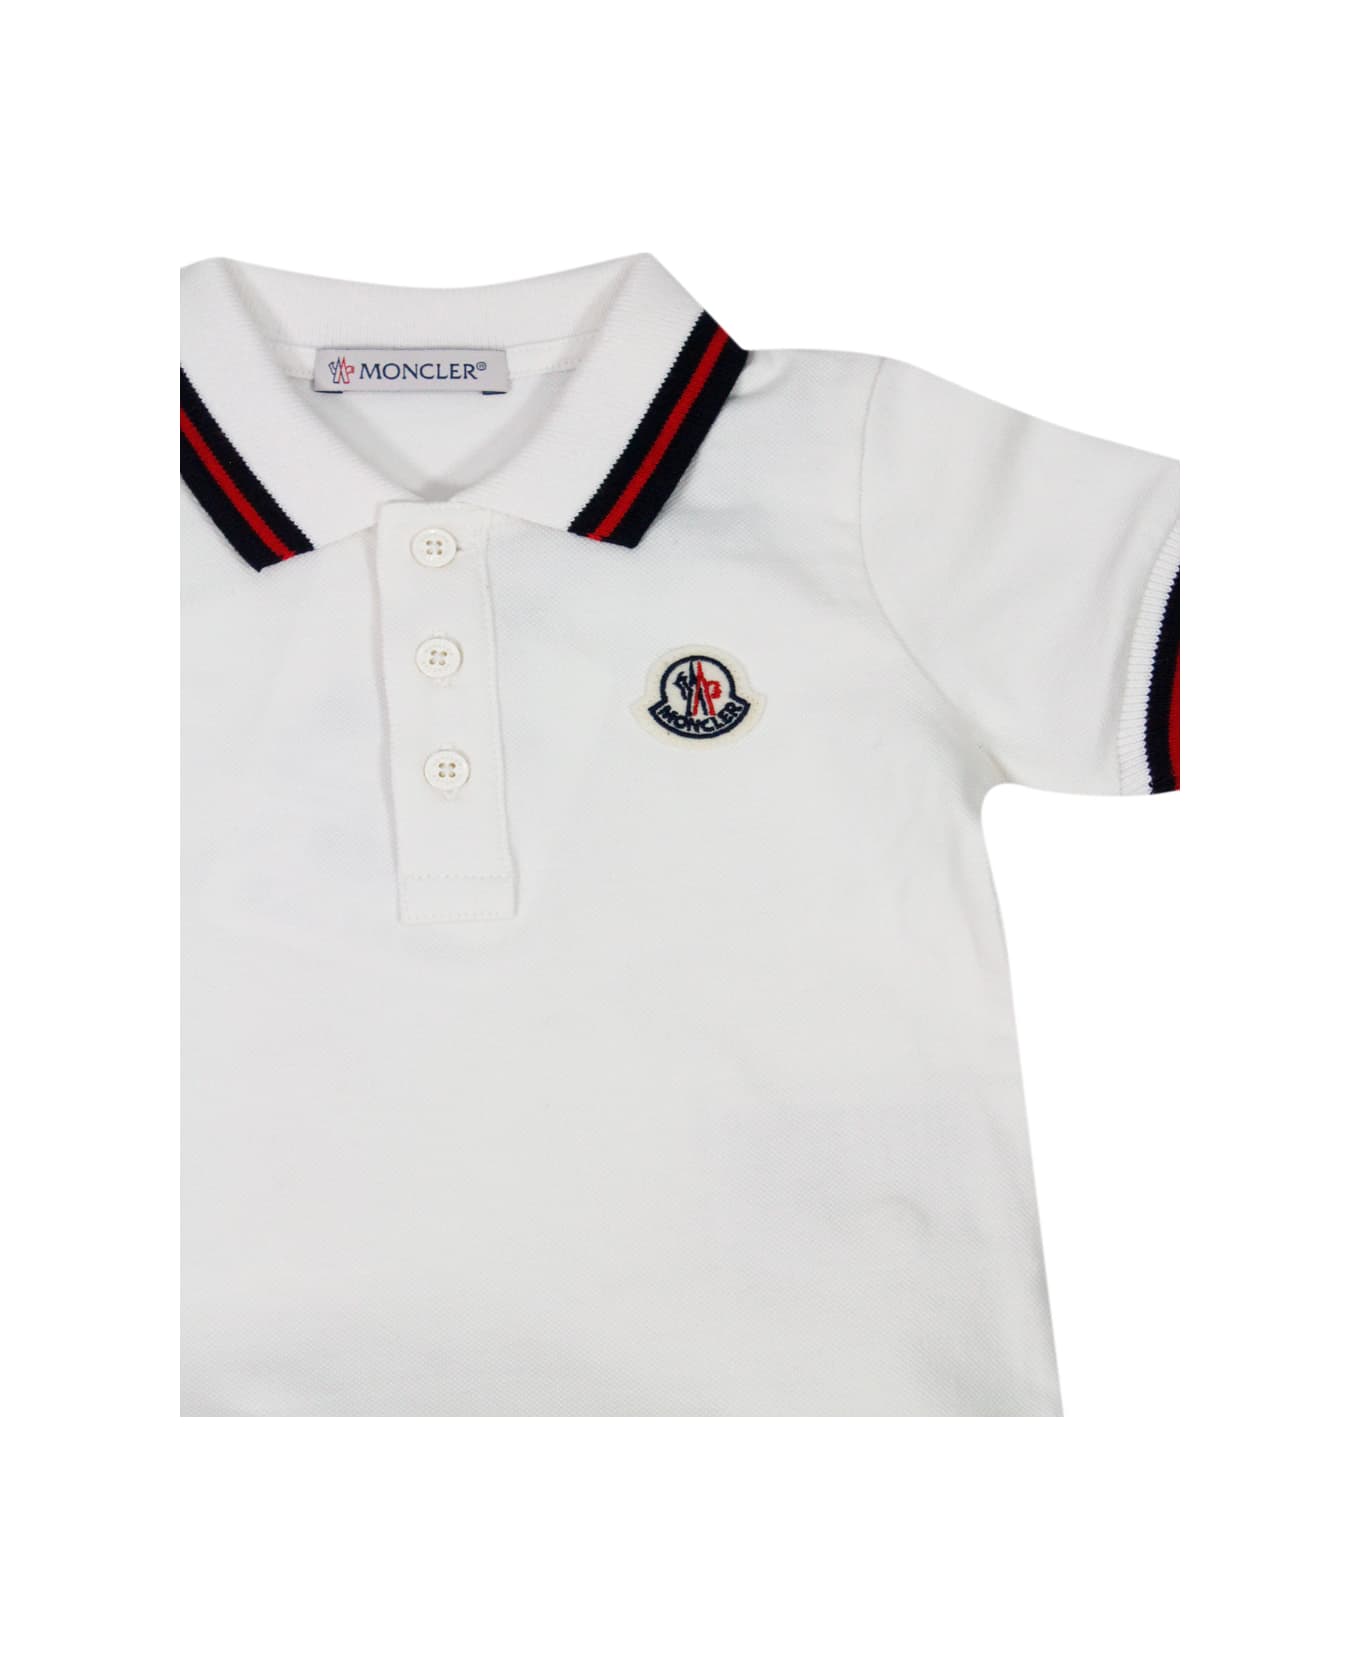 Moncler Complete With Short Sleeve Polo Shirt And Shorts With Elastic Waist - White